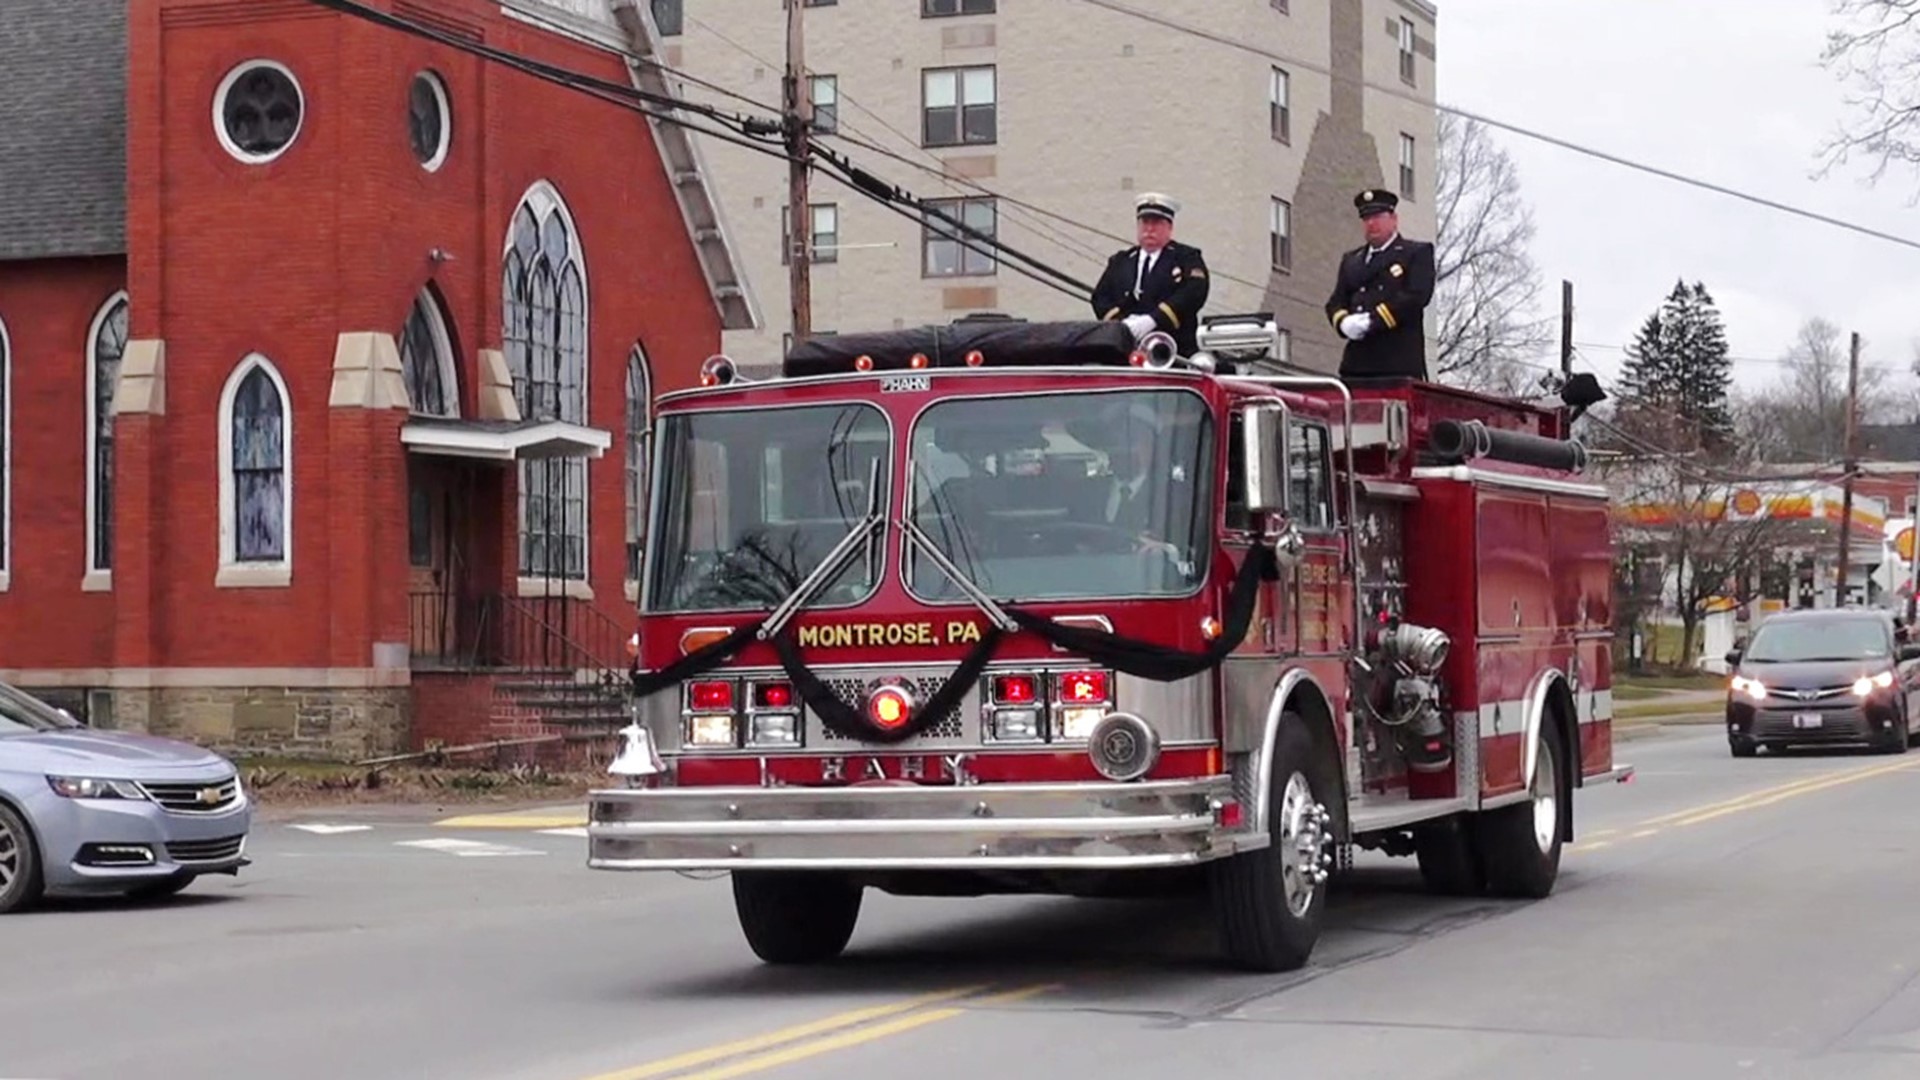 The funeral procession on Monday morning in Montrose was in honor of Patrick Daly.